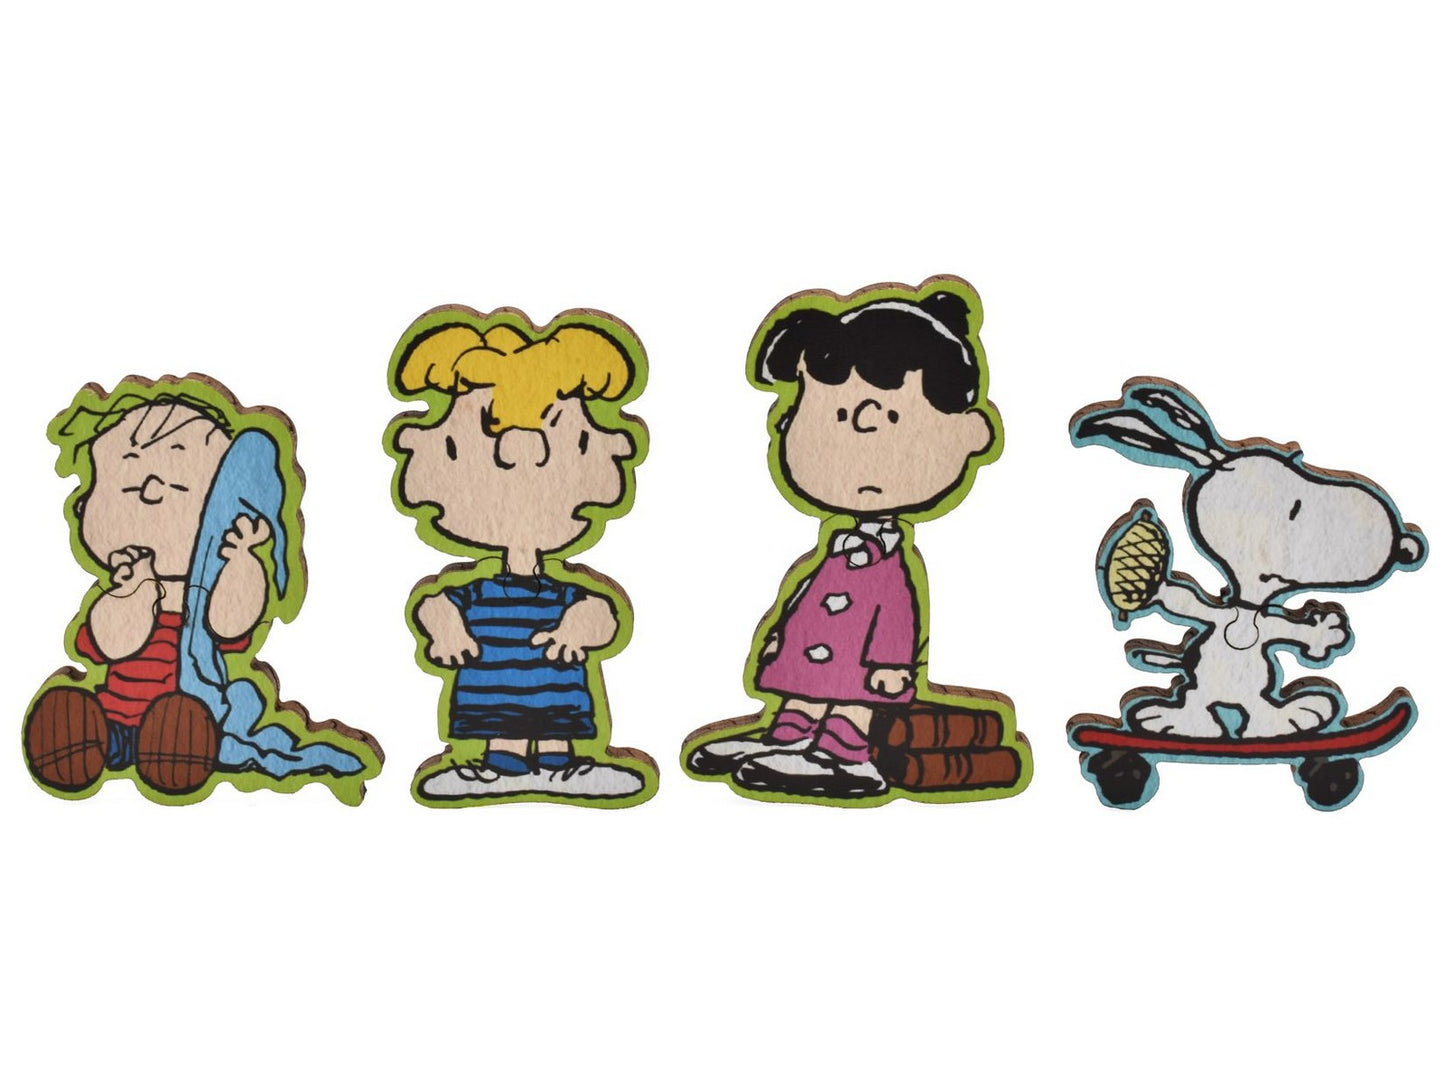 A closeup of pieces in the shape of Linus, Schroeder, Violet, and Snoopy.